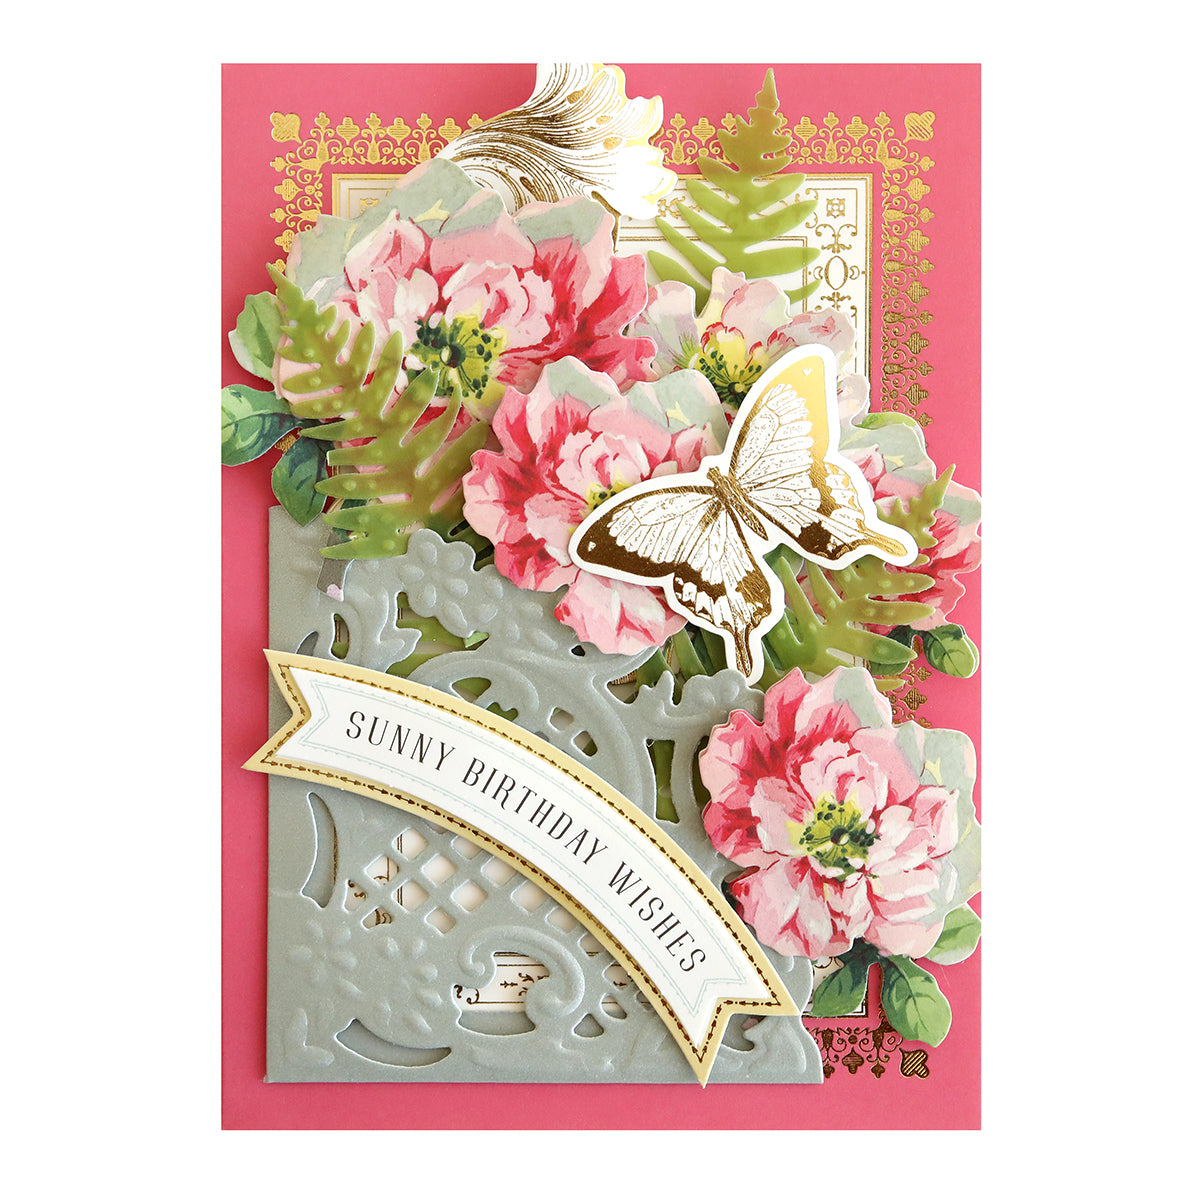 An elegant pink card adorned with flowers and butterflies, perfect for Anniversary Pocket Dies cards.